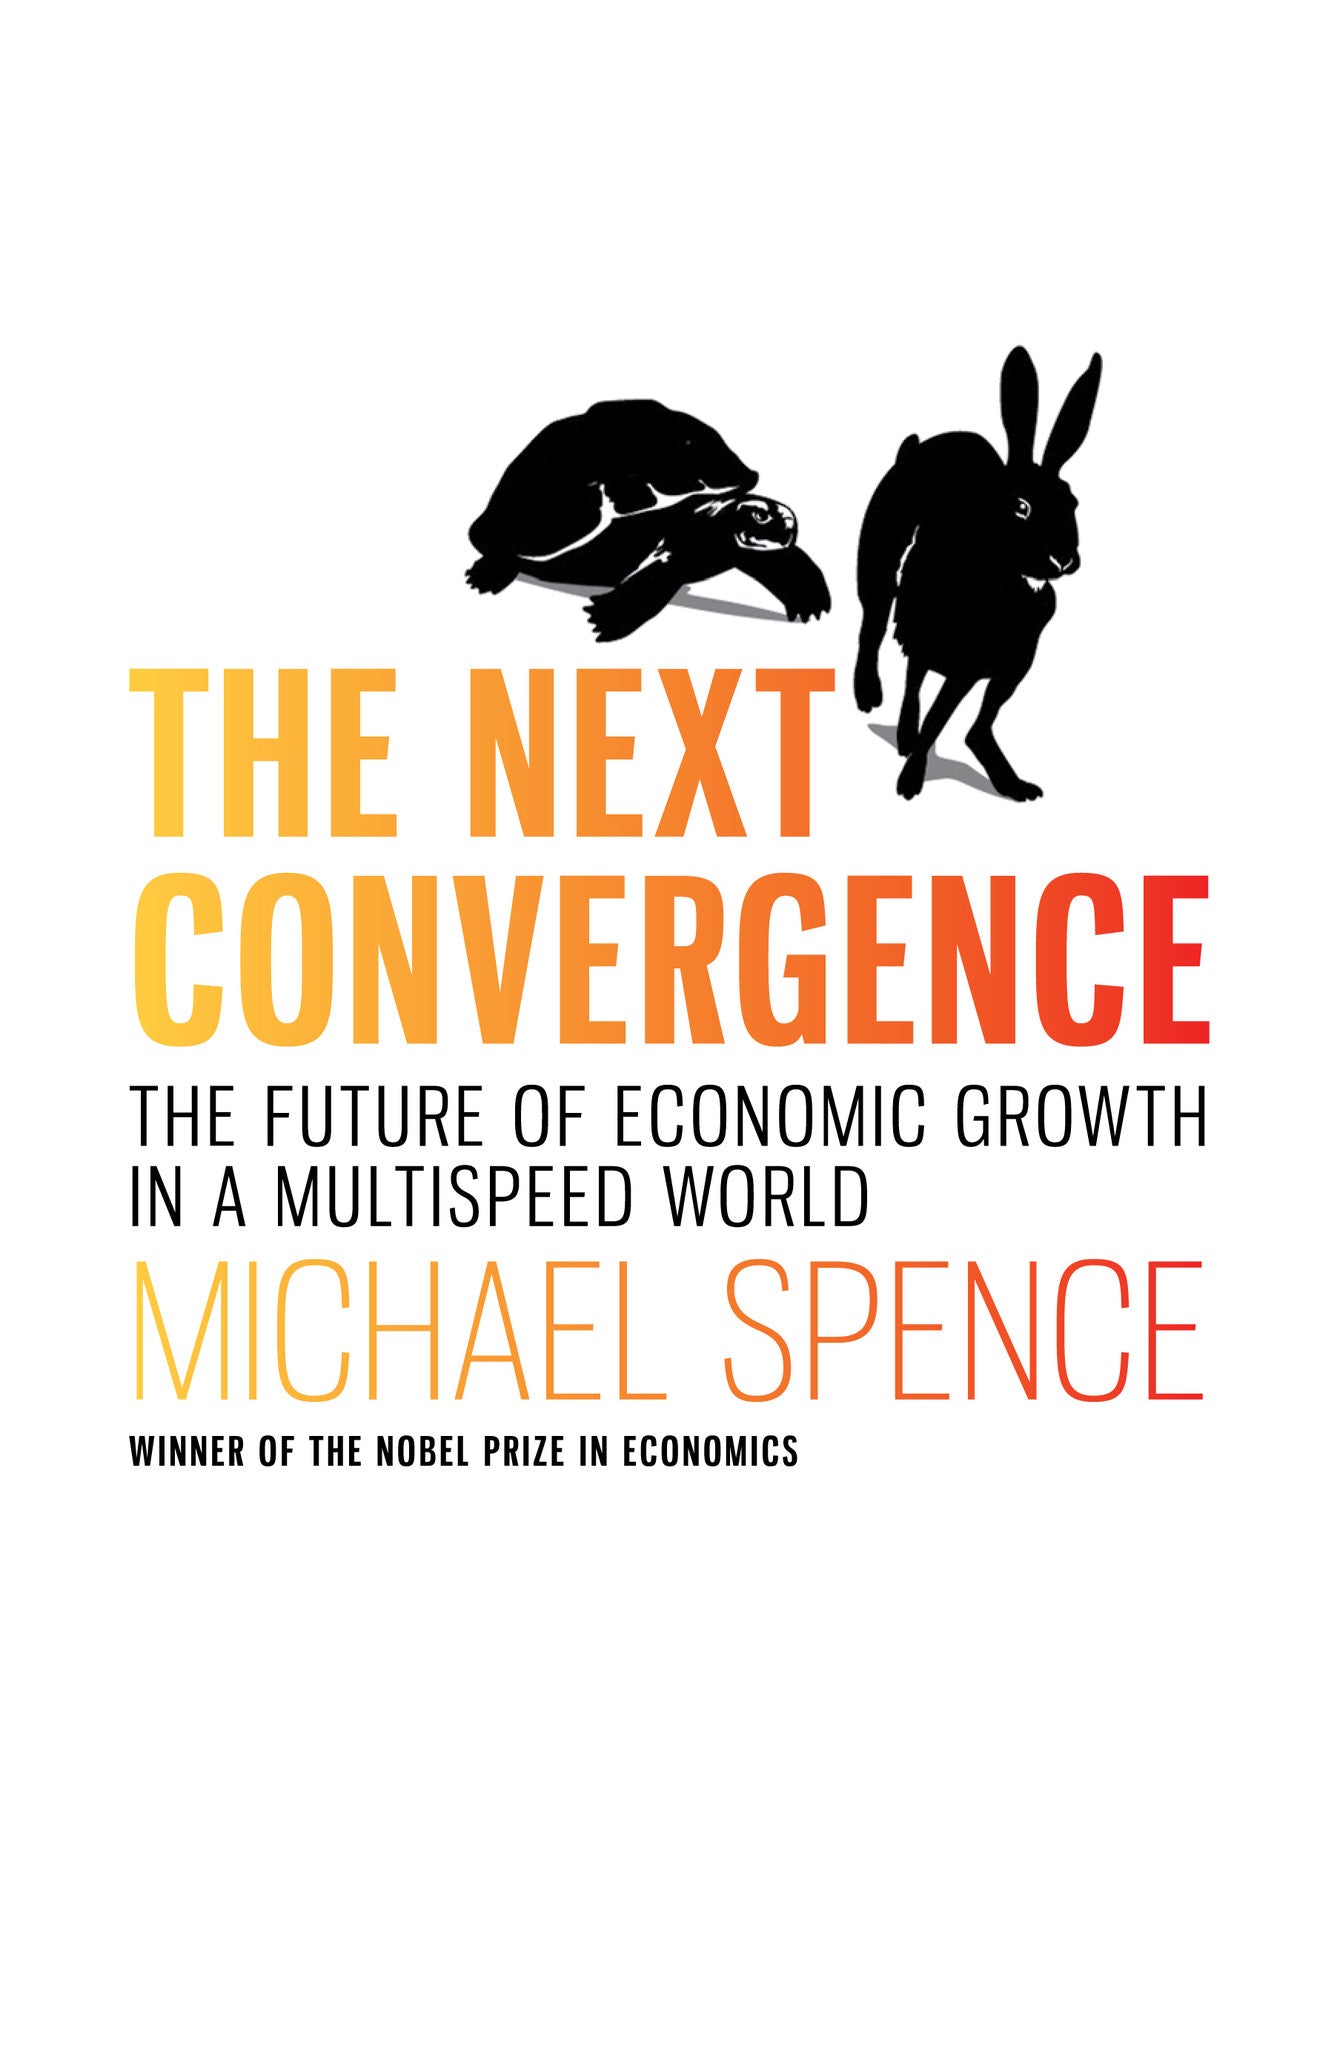 The Next Convergence: The Future of Economic Growth in a Multi-speed World